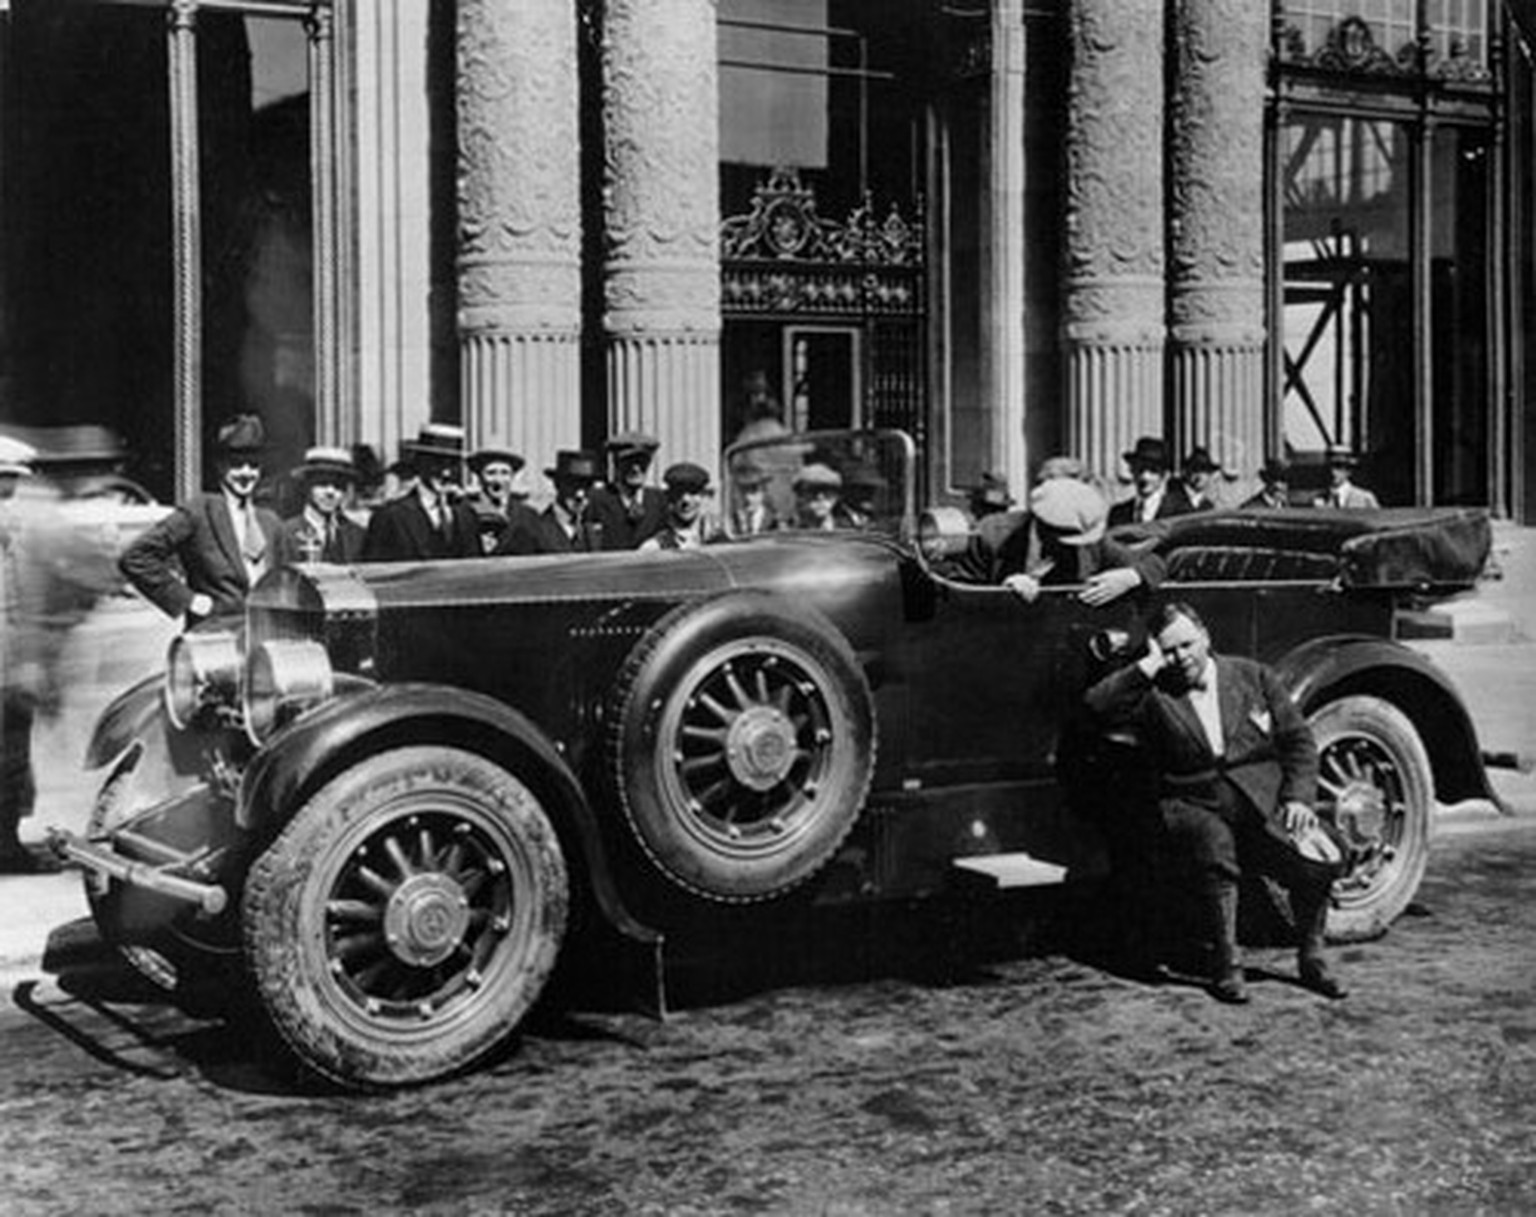 Fatty Arbuckle at the height of his fame with his $25,000 Pierce Arrow.
hollywood stummfilm skandal auto motor 
http://sflib1.sfpl.org:82/record=b1000435